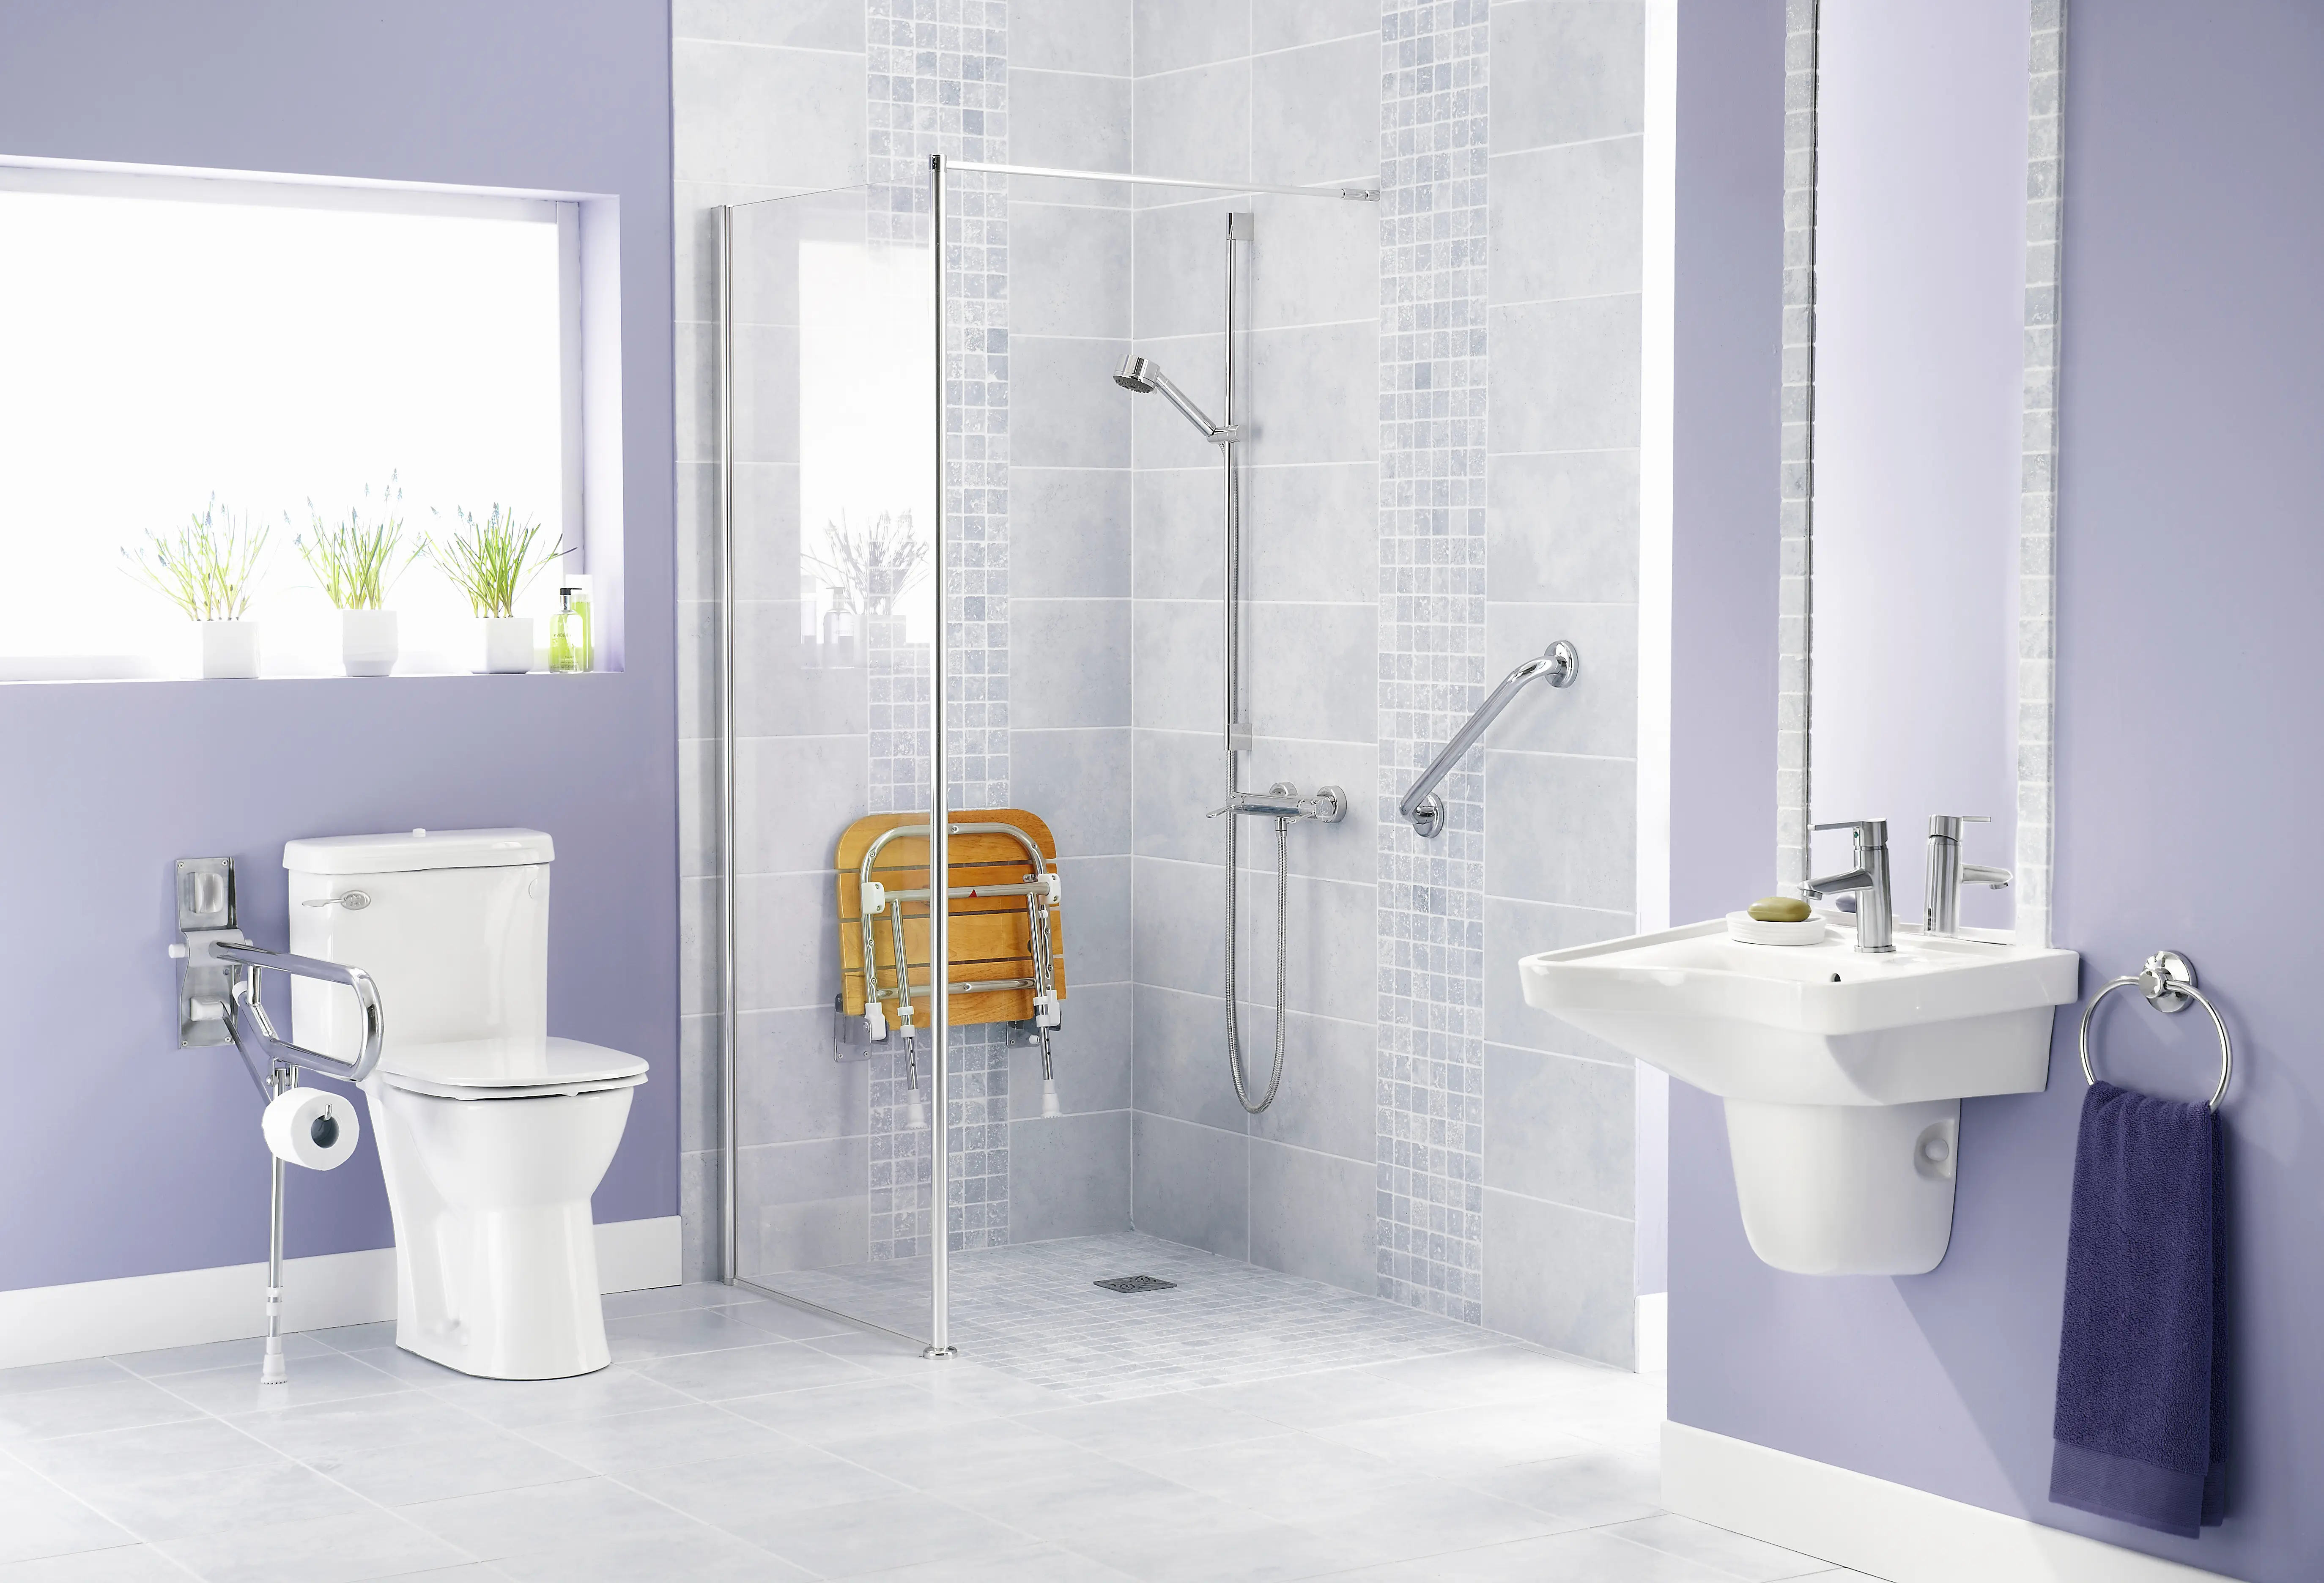 A large shower and bathroom with safety devices in place.